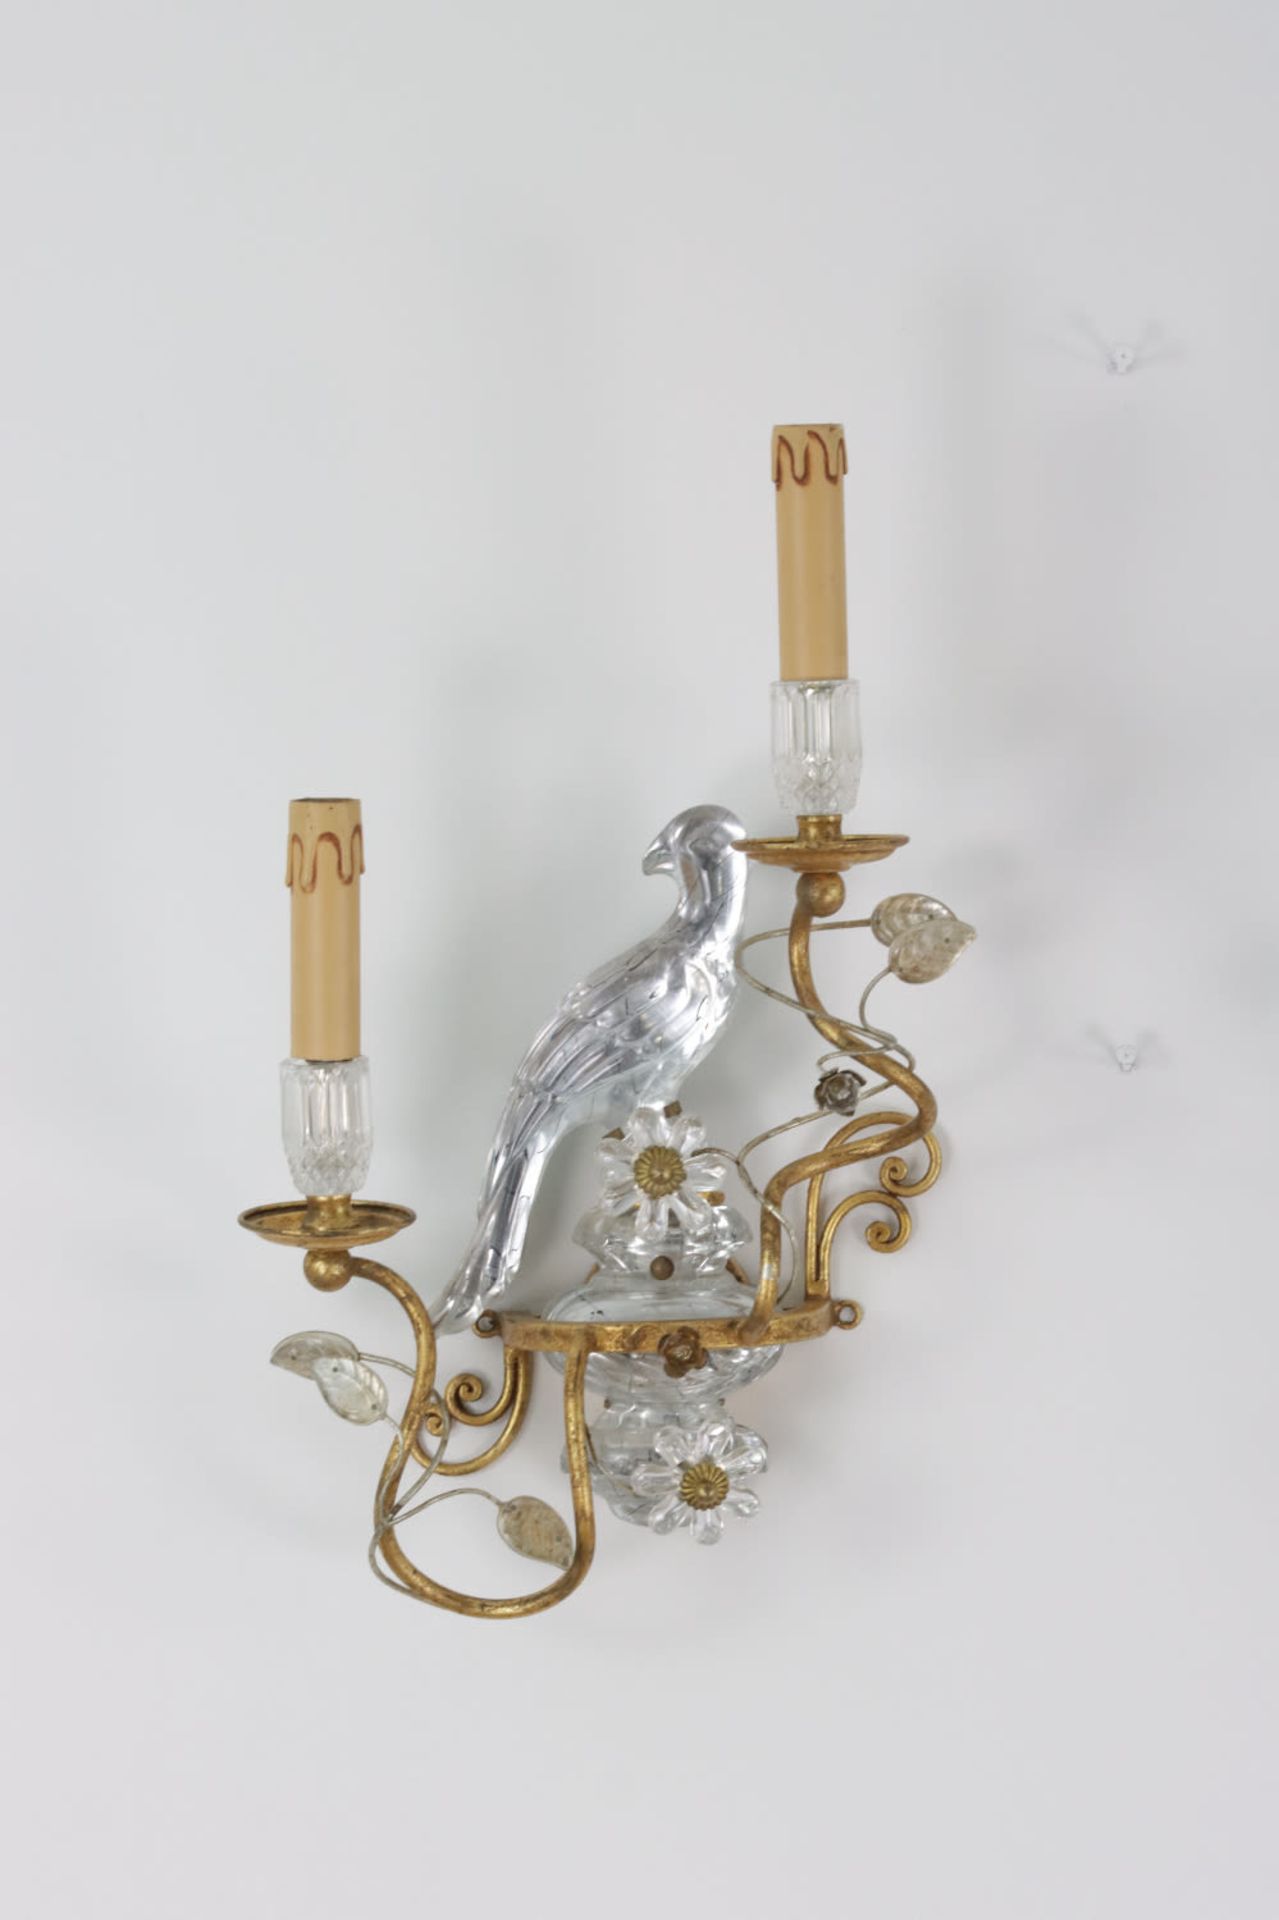 A Pair of crystal and gilt parrot wall lights by Banci Firenze, Mid 20th Century - Image 3 of 4